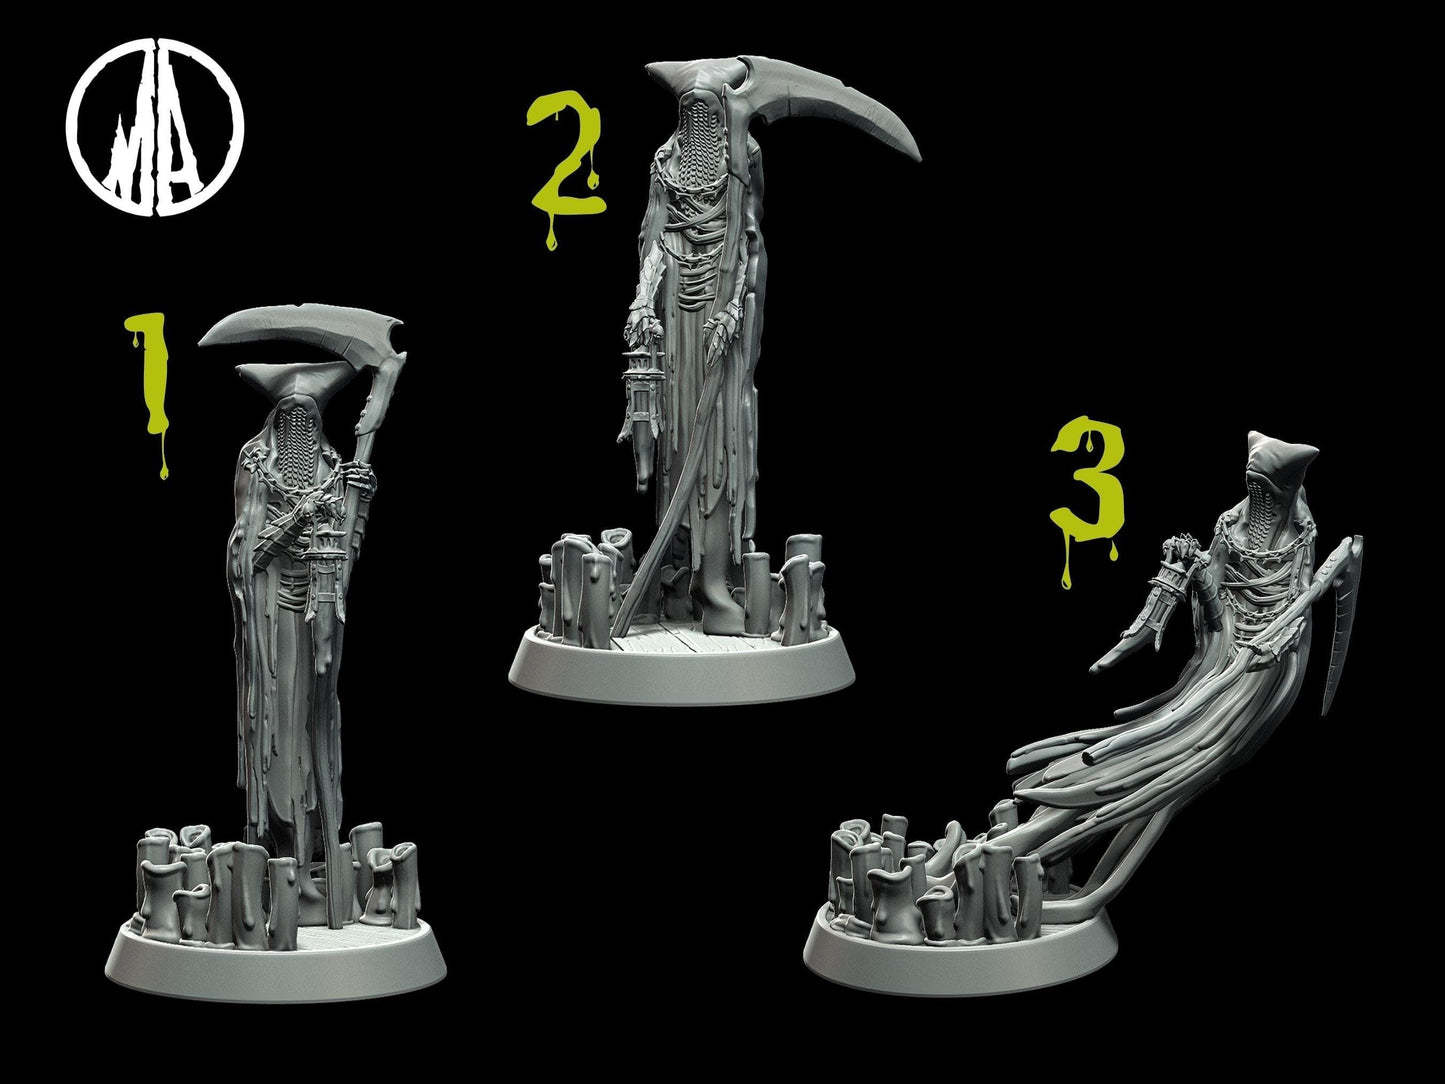 Cursed Wretch DnD Miniature - 3 Poses - 28mm scale Tabletop gaming DnD Miniature Dungeons and Dragons dnd 5e - Plague Miniatures shop for DnD Miniatures